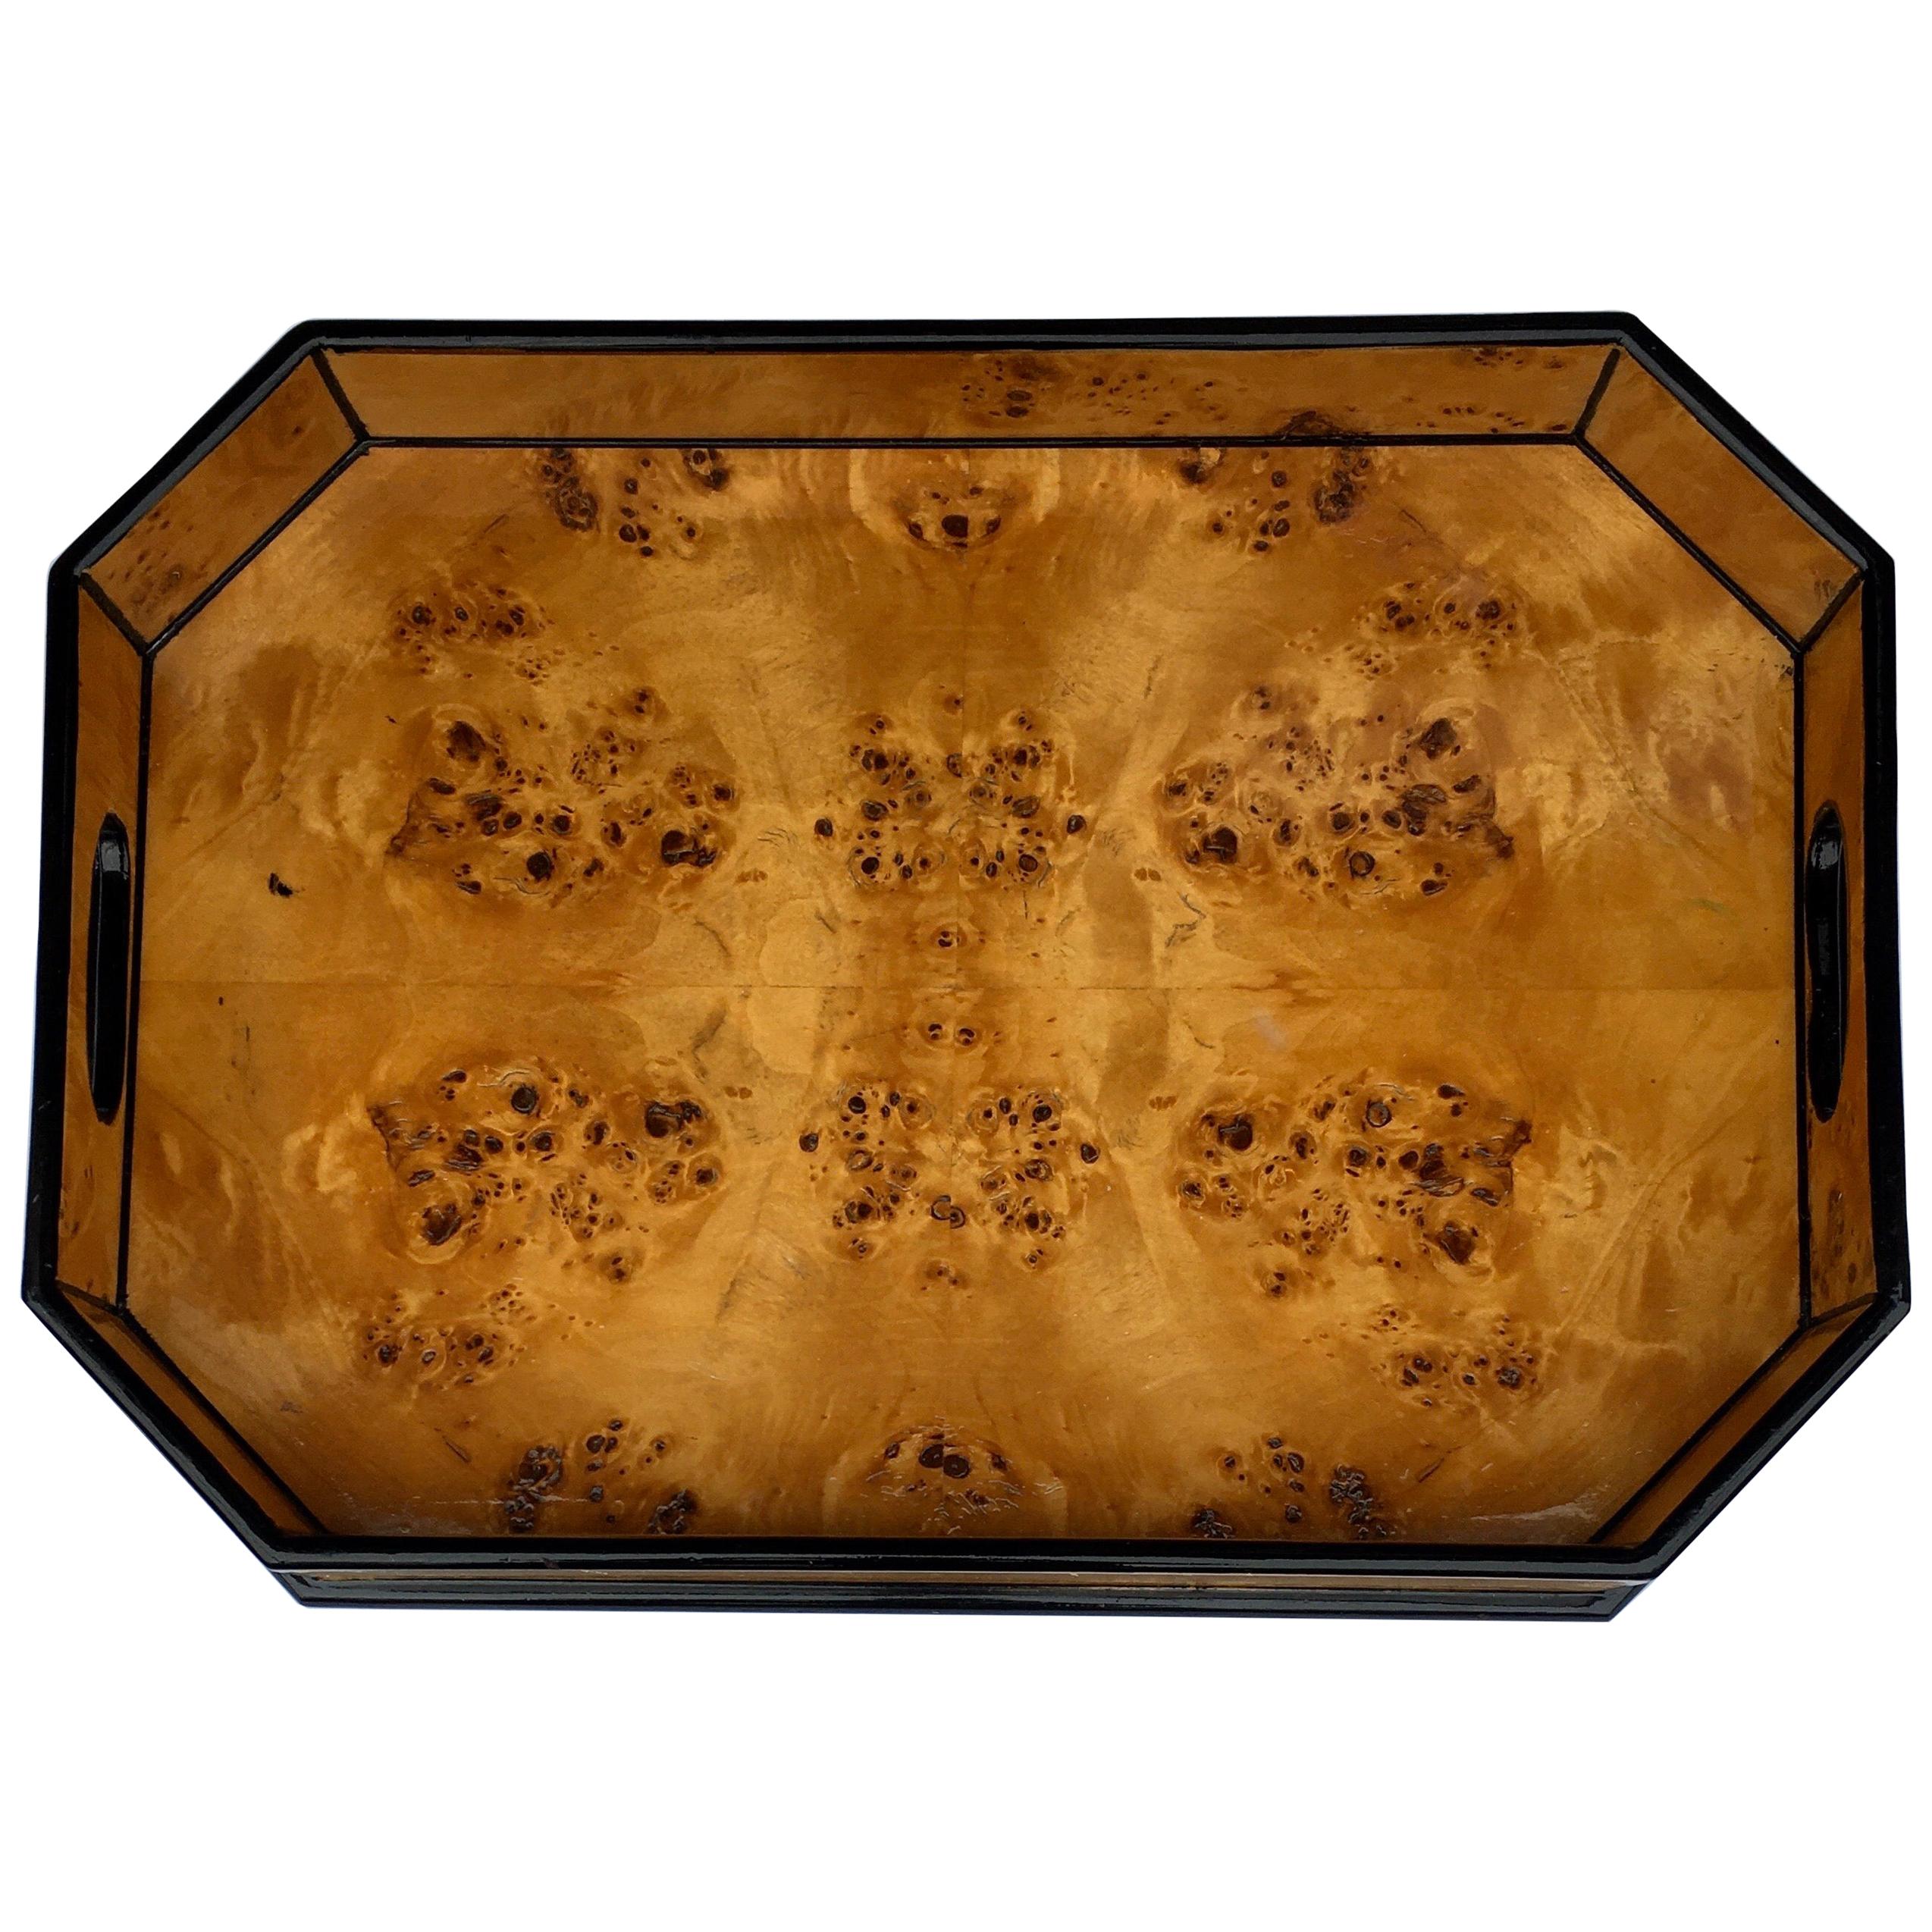 Tommaso Barbi Style Lacquer Burl Wood Serving Bar Ottoman Tray